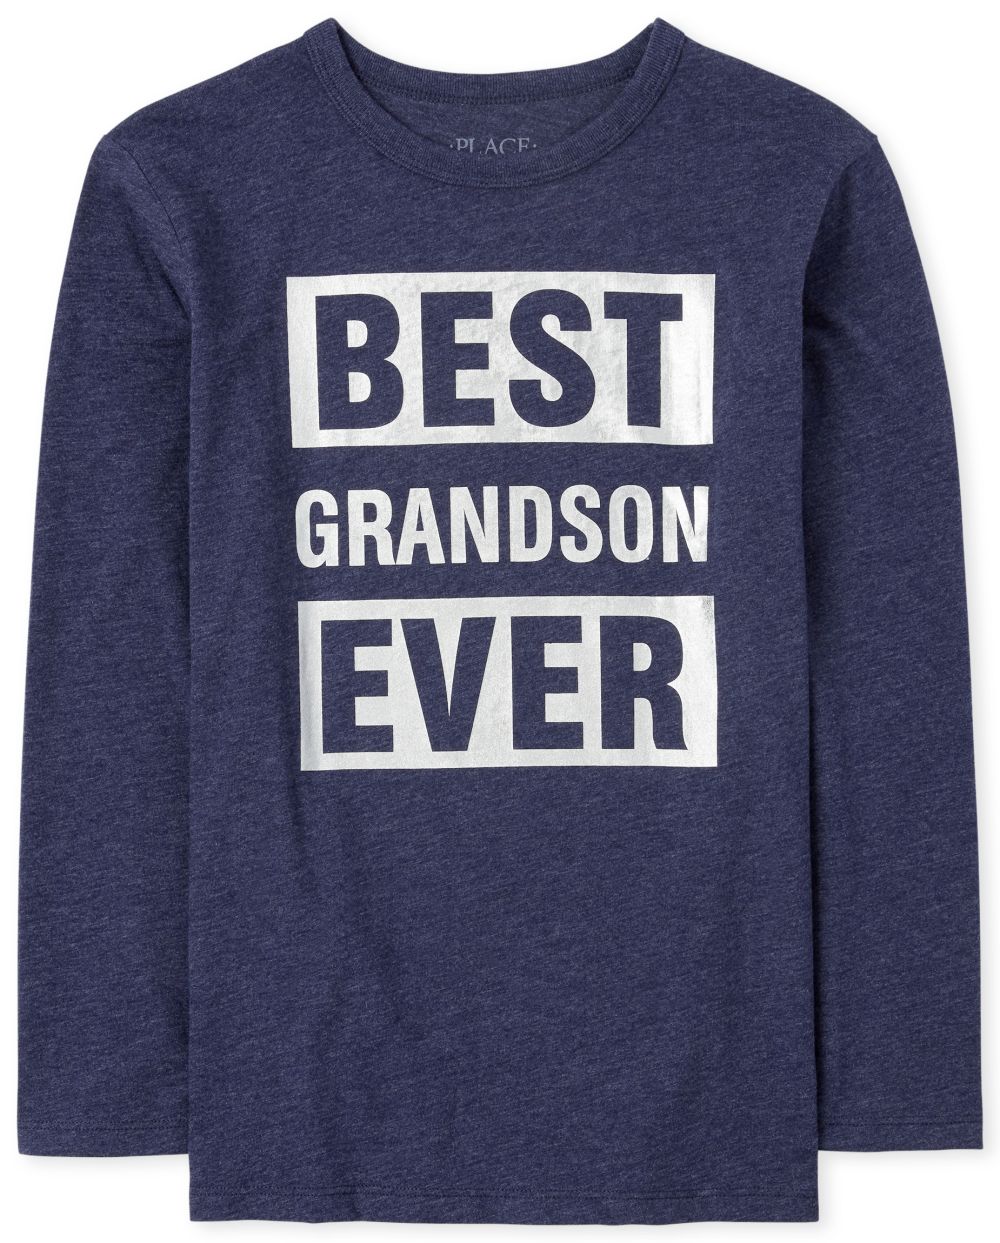 Boys Matching Family Long Sleeve Foil 'Best Grandson Ever' Graphic Tee